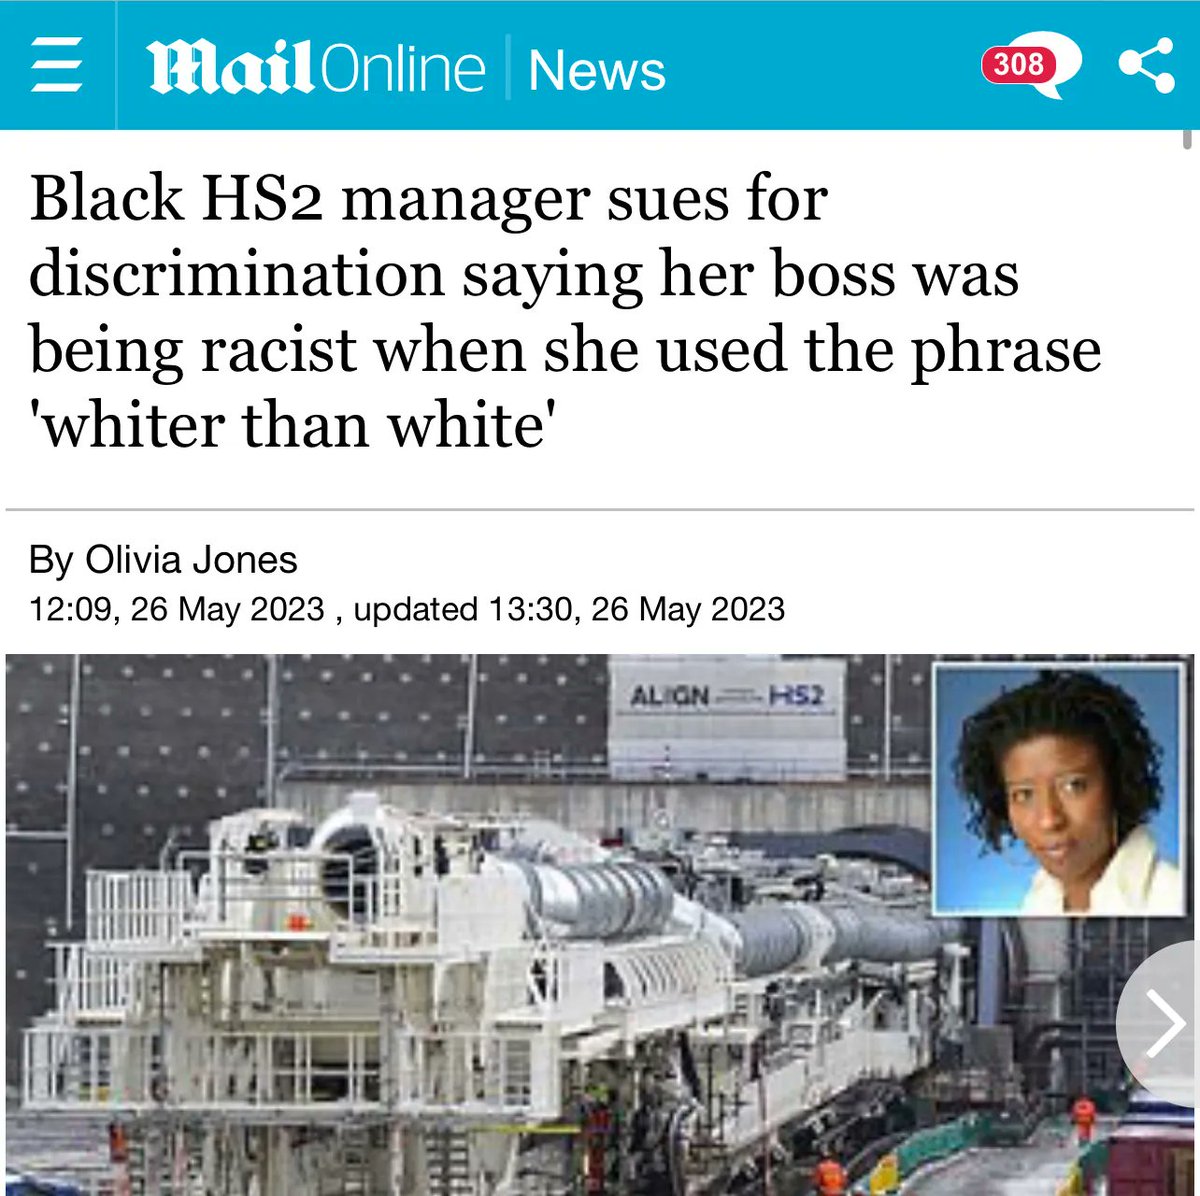 Good grief. ‘Whiter than white’ is an age-old British saying. It’s got nothing to do with race. What a grifter 😤